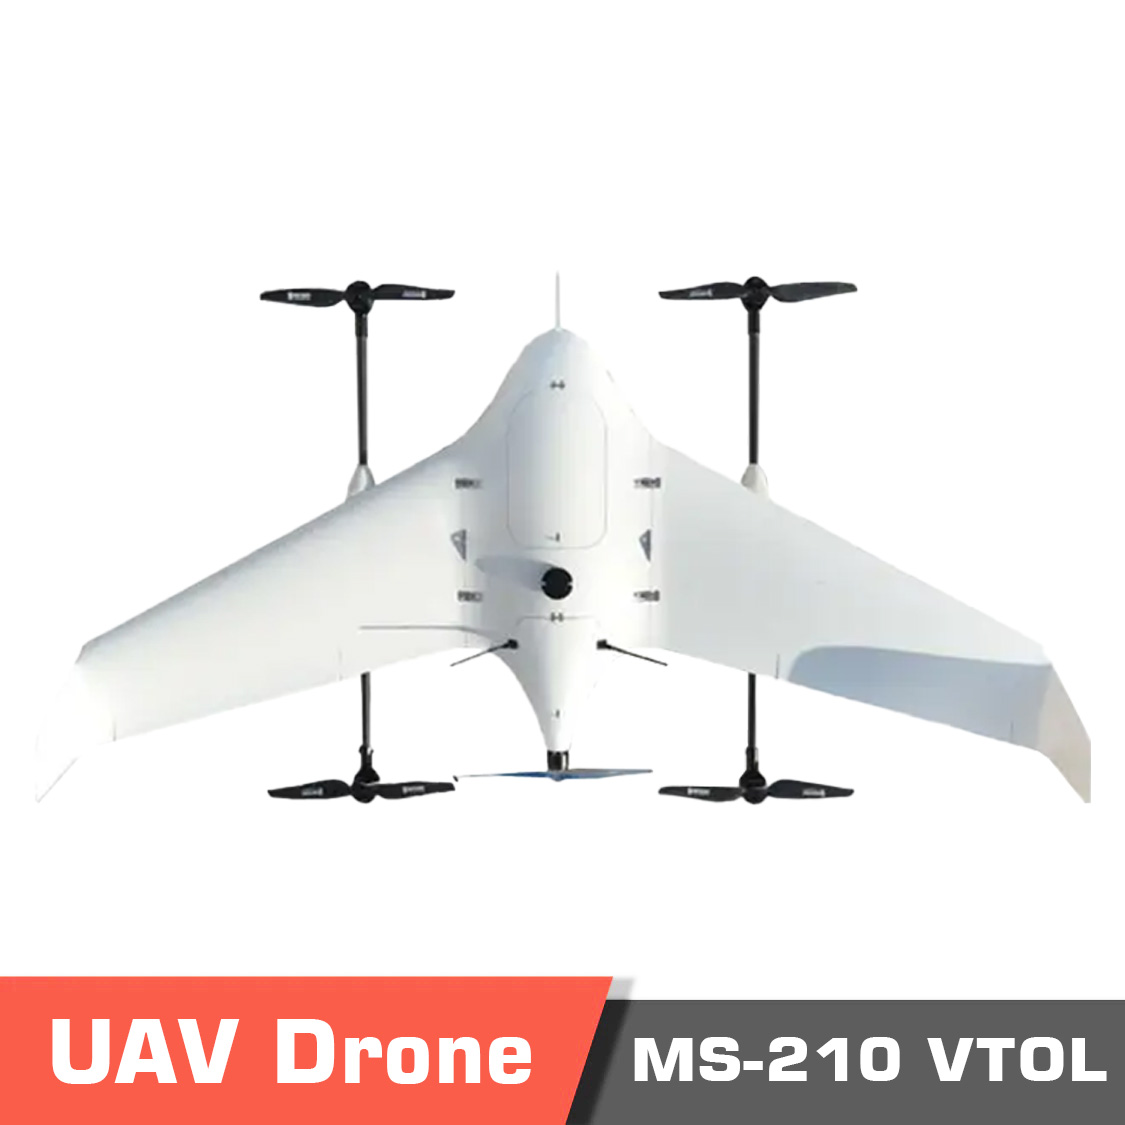 Ms210 1 - me-216,me-216 vtol,long endurance,fixedwing uav,cargo drone,wind resistance,detachable load,mapping drone,detachable payload,surveying drone,fixed-wing uav,heavy lift drone,vertical take-off,vertical landing,redundant sensors,four-axis,eight-propeller rotor,low temperature resistance - motionew - 2